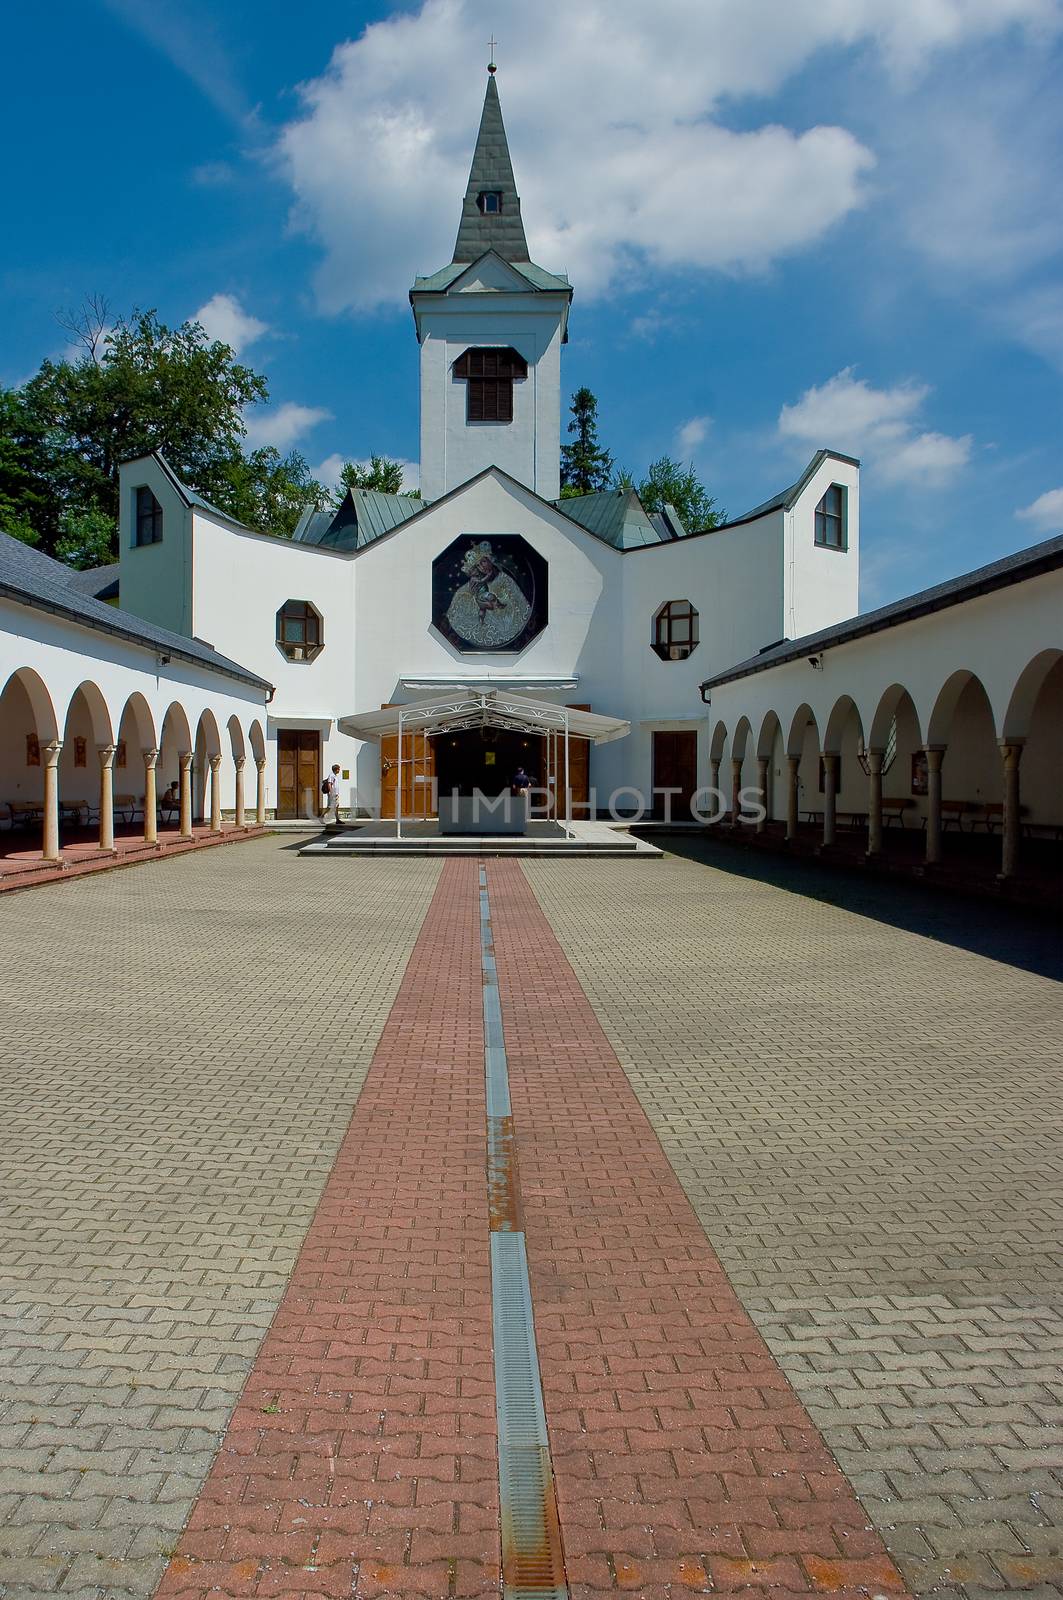 The pilgrimage church dedicated to Virgin Mary in the Jeseniky in the Czech Republic.